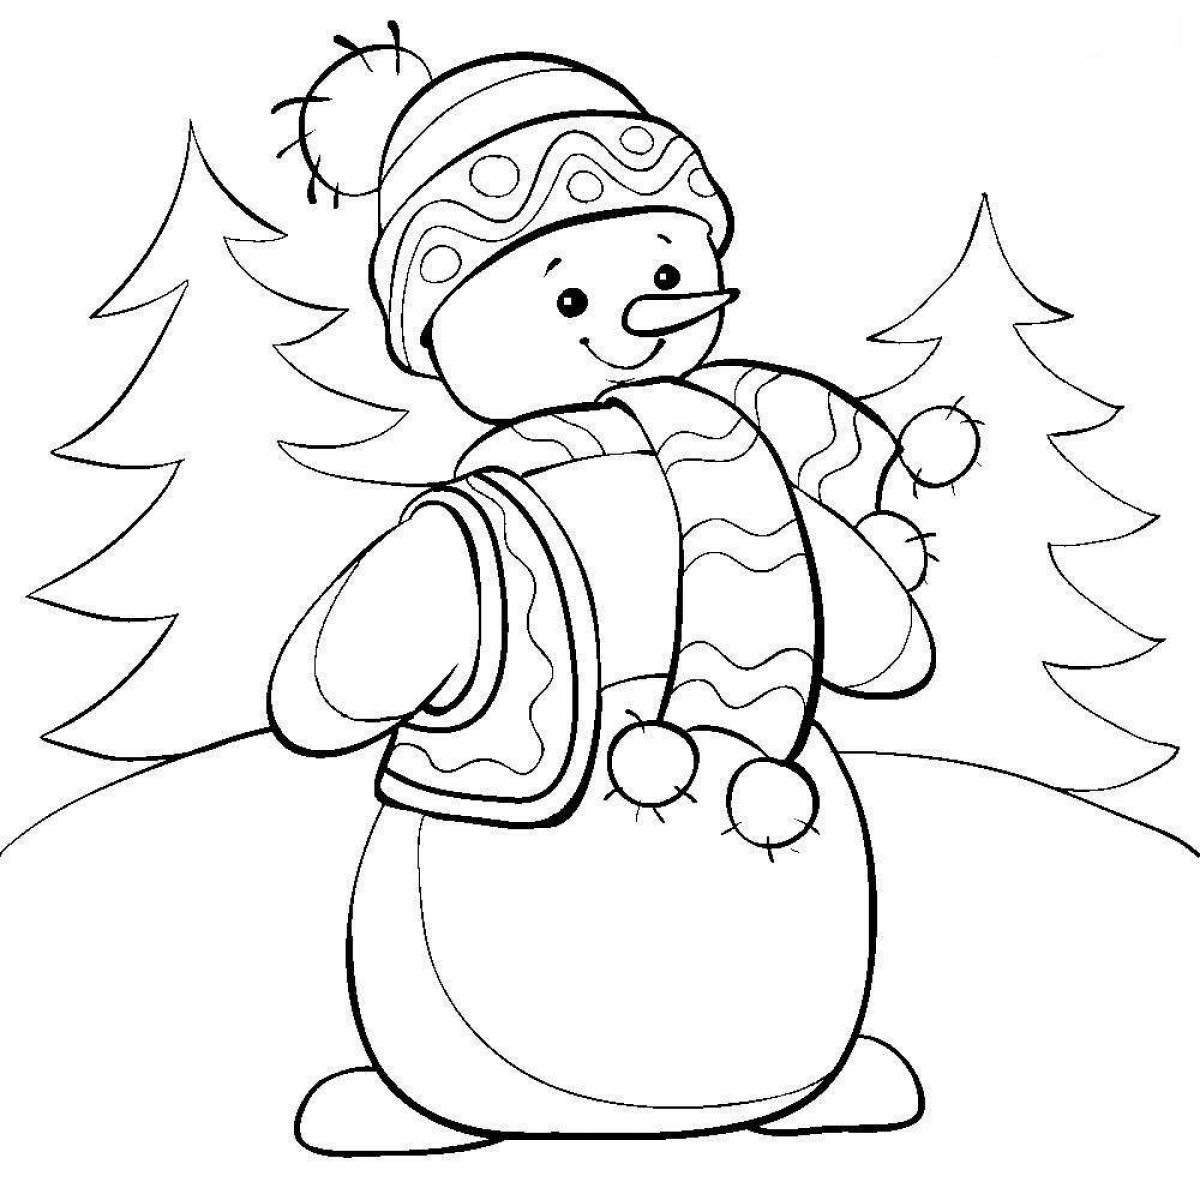 Higgly snowman coloring book